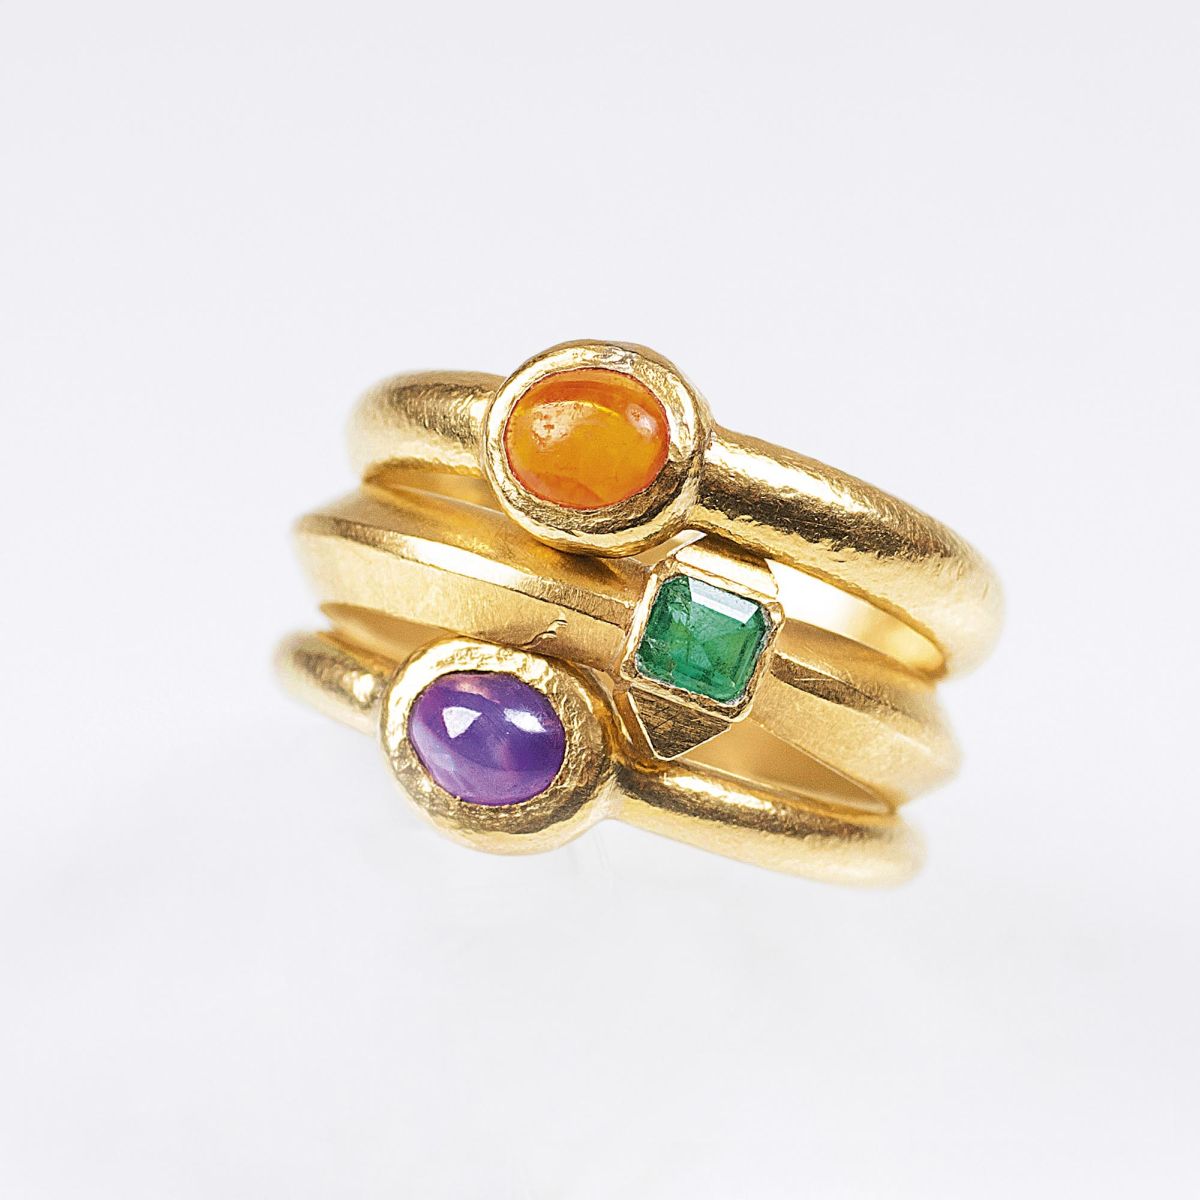 A Set of 3 Gold Ring with coloured stones by Armin Haase